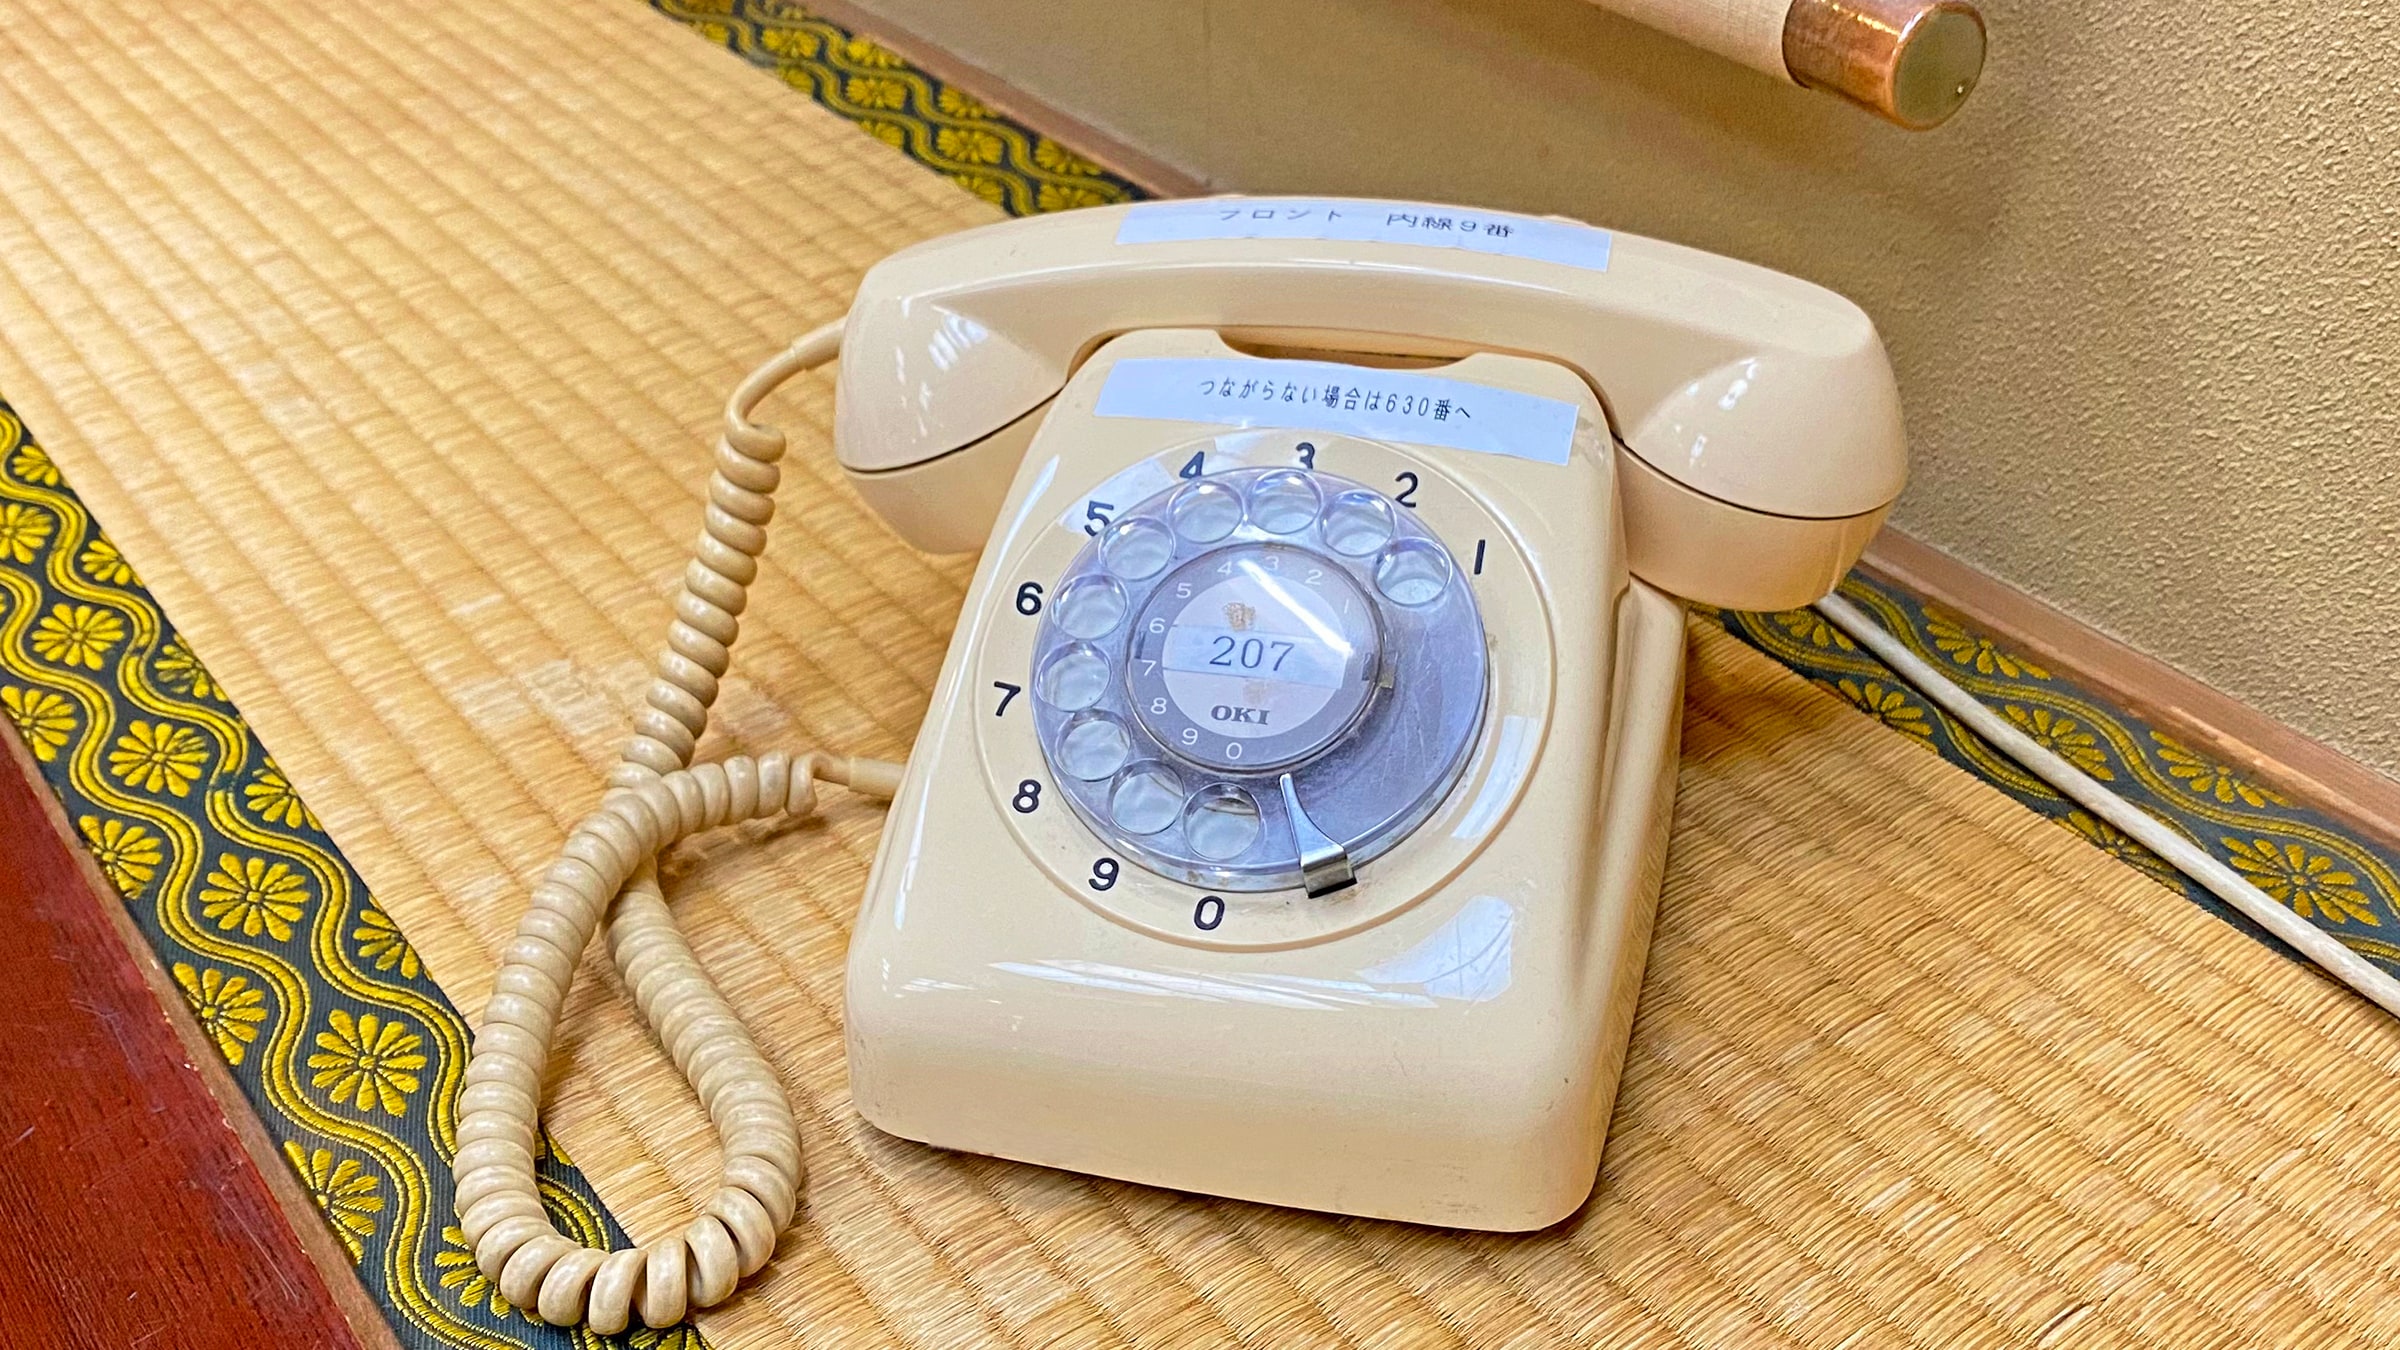 ◆ Room dial-type extension phone example